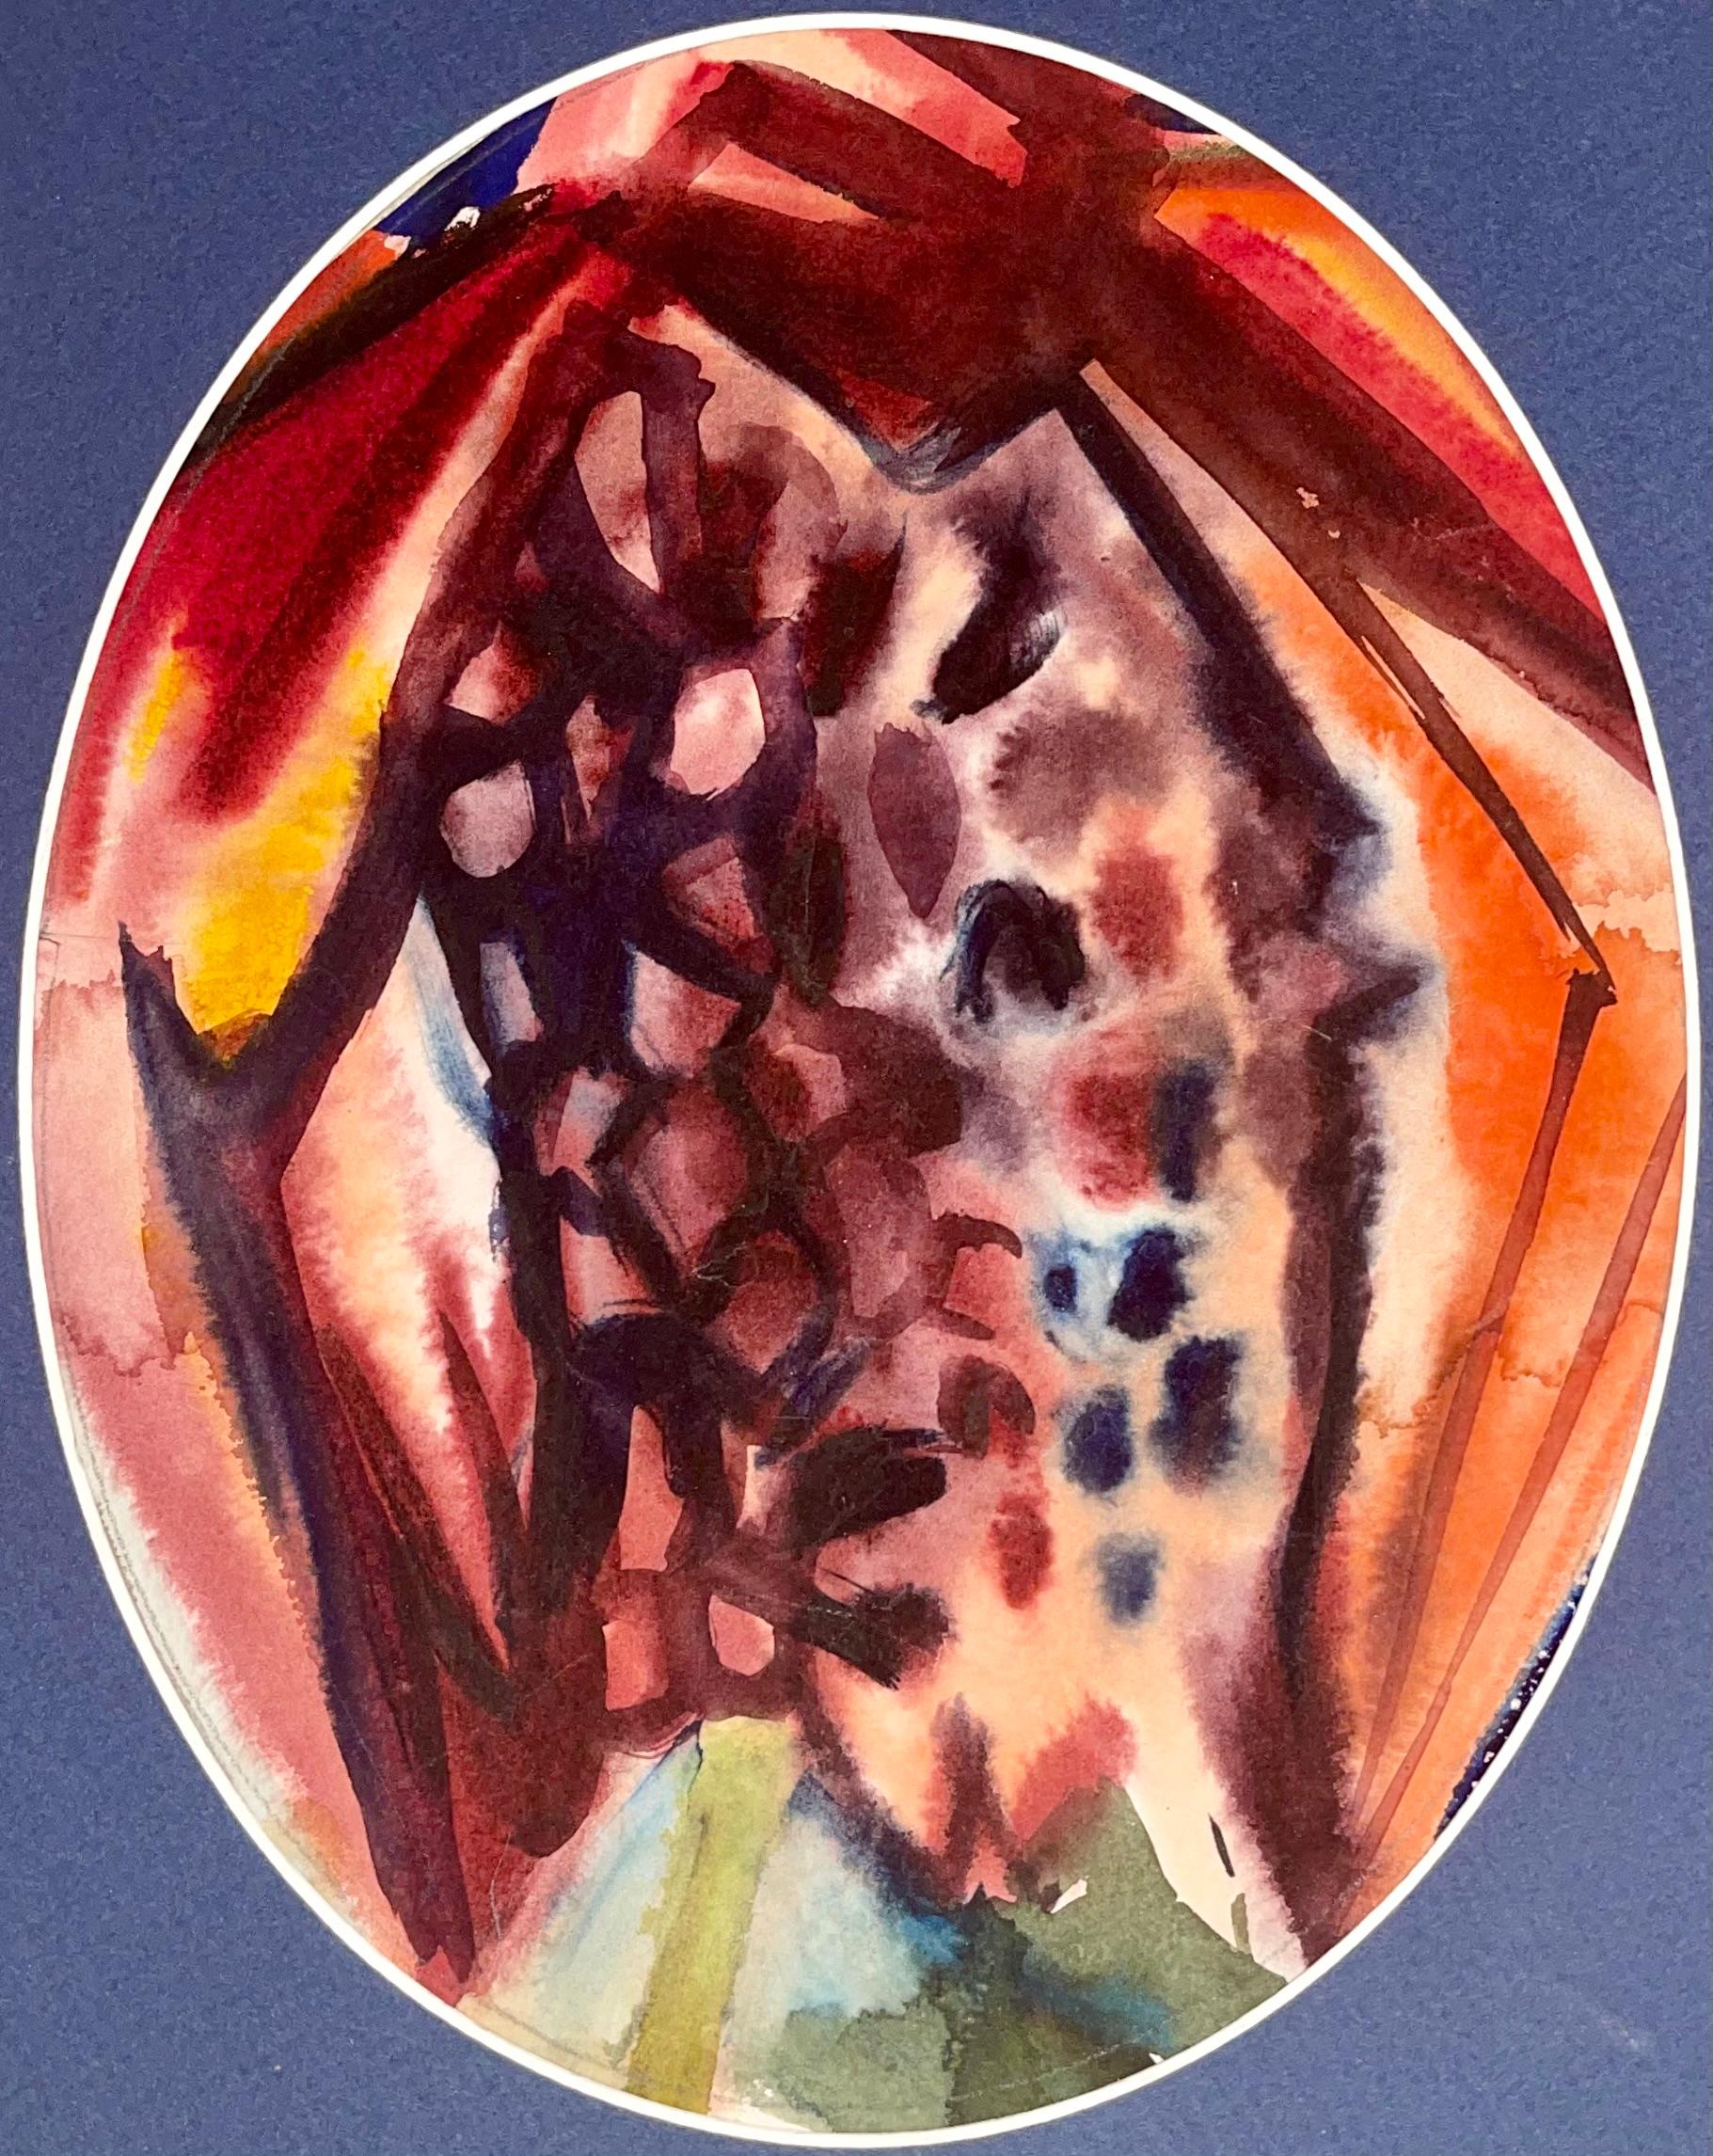 Original painting on archival paper, circa 1964.  Paper Size: 10 x 9 inches (oval). Provenance: Estate of Ian Hornak, East Hampton, New York. Notes: Created during Hornak’s undergraduate studies at Wayne State University in Detroit, Michigan.

IAN